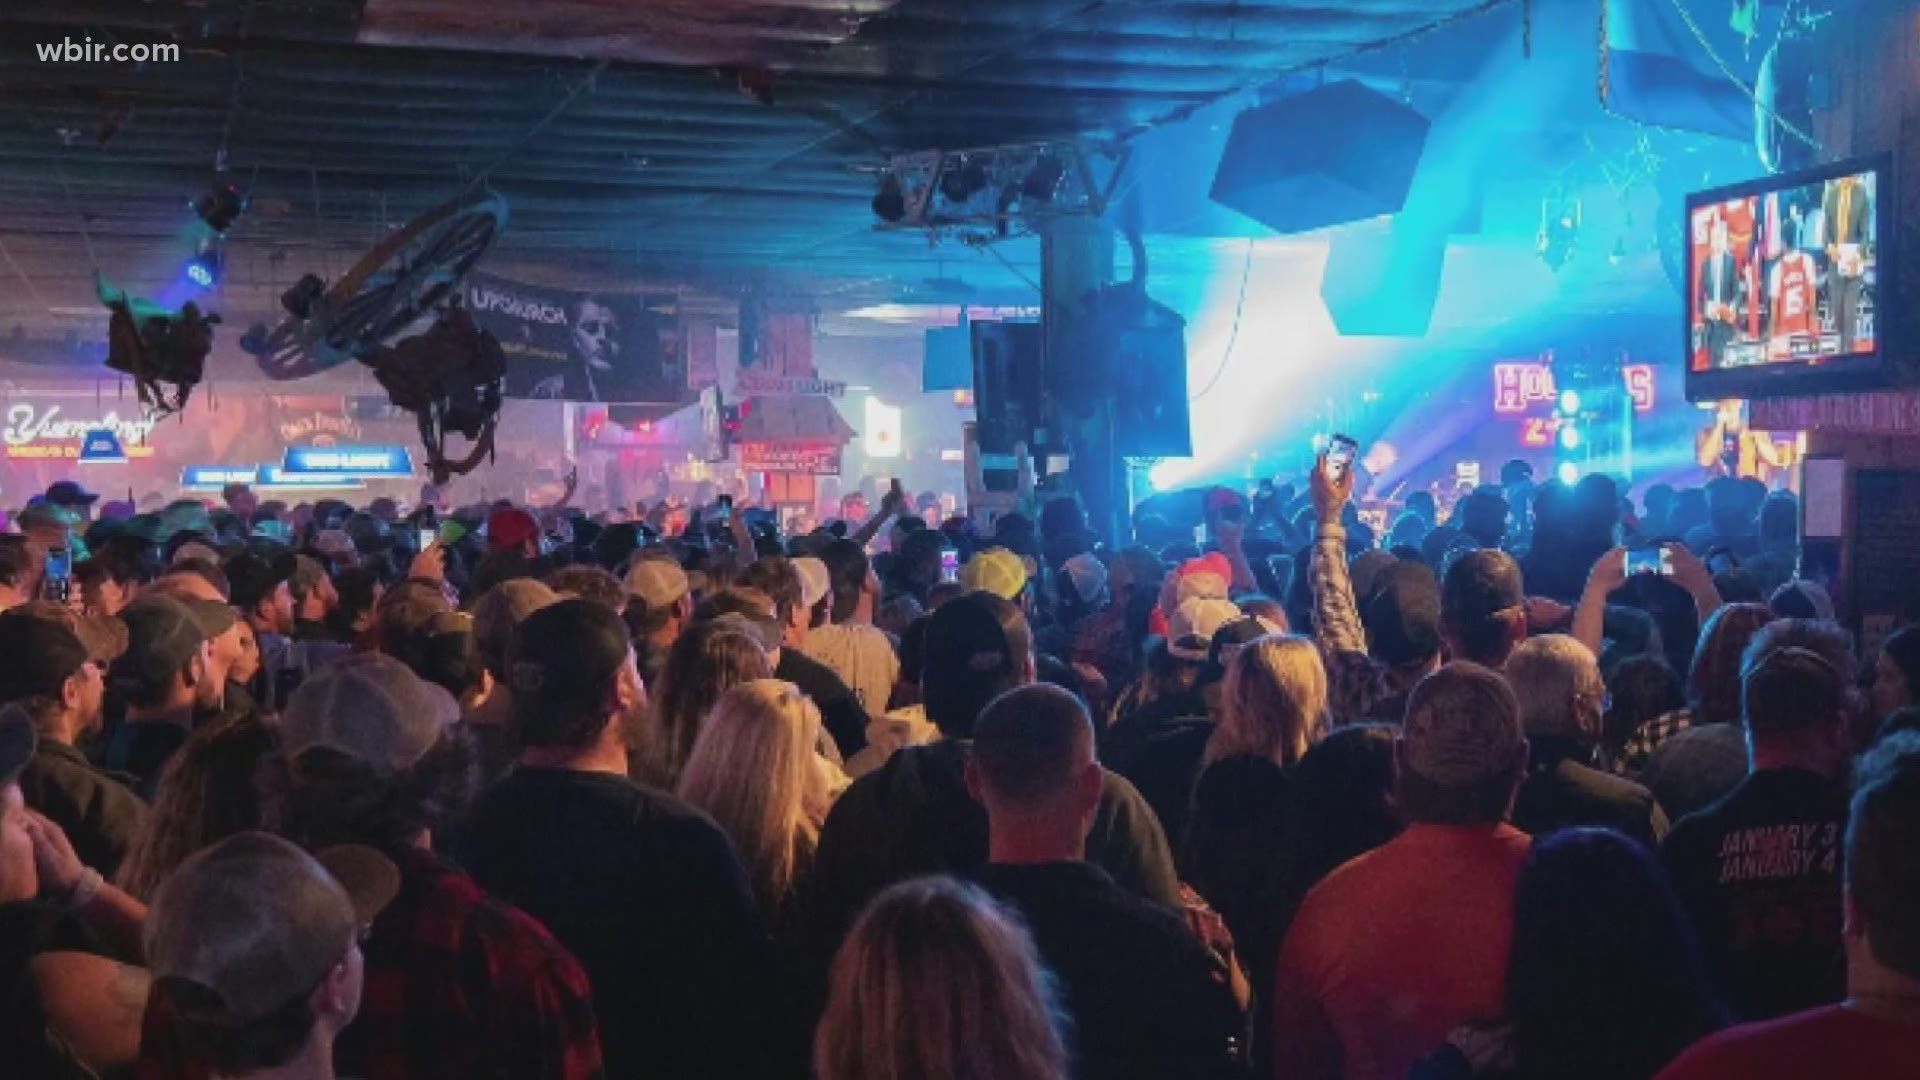 This weekend Cotton Eyed Joe held two concerts, packing the bar, failing to follow the Board of Health's regulations. Several viewers reached out with their concerns